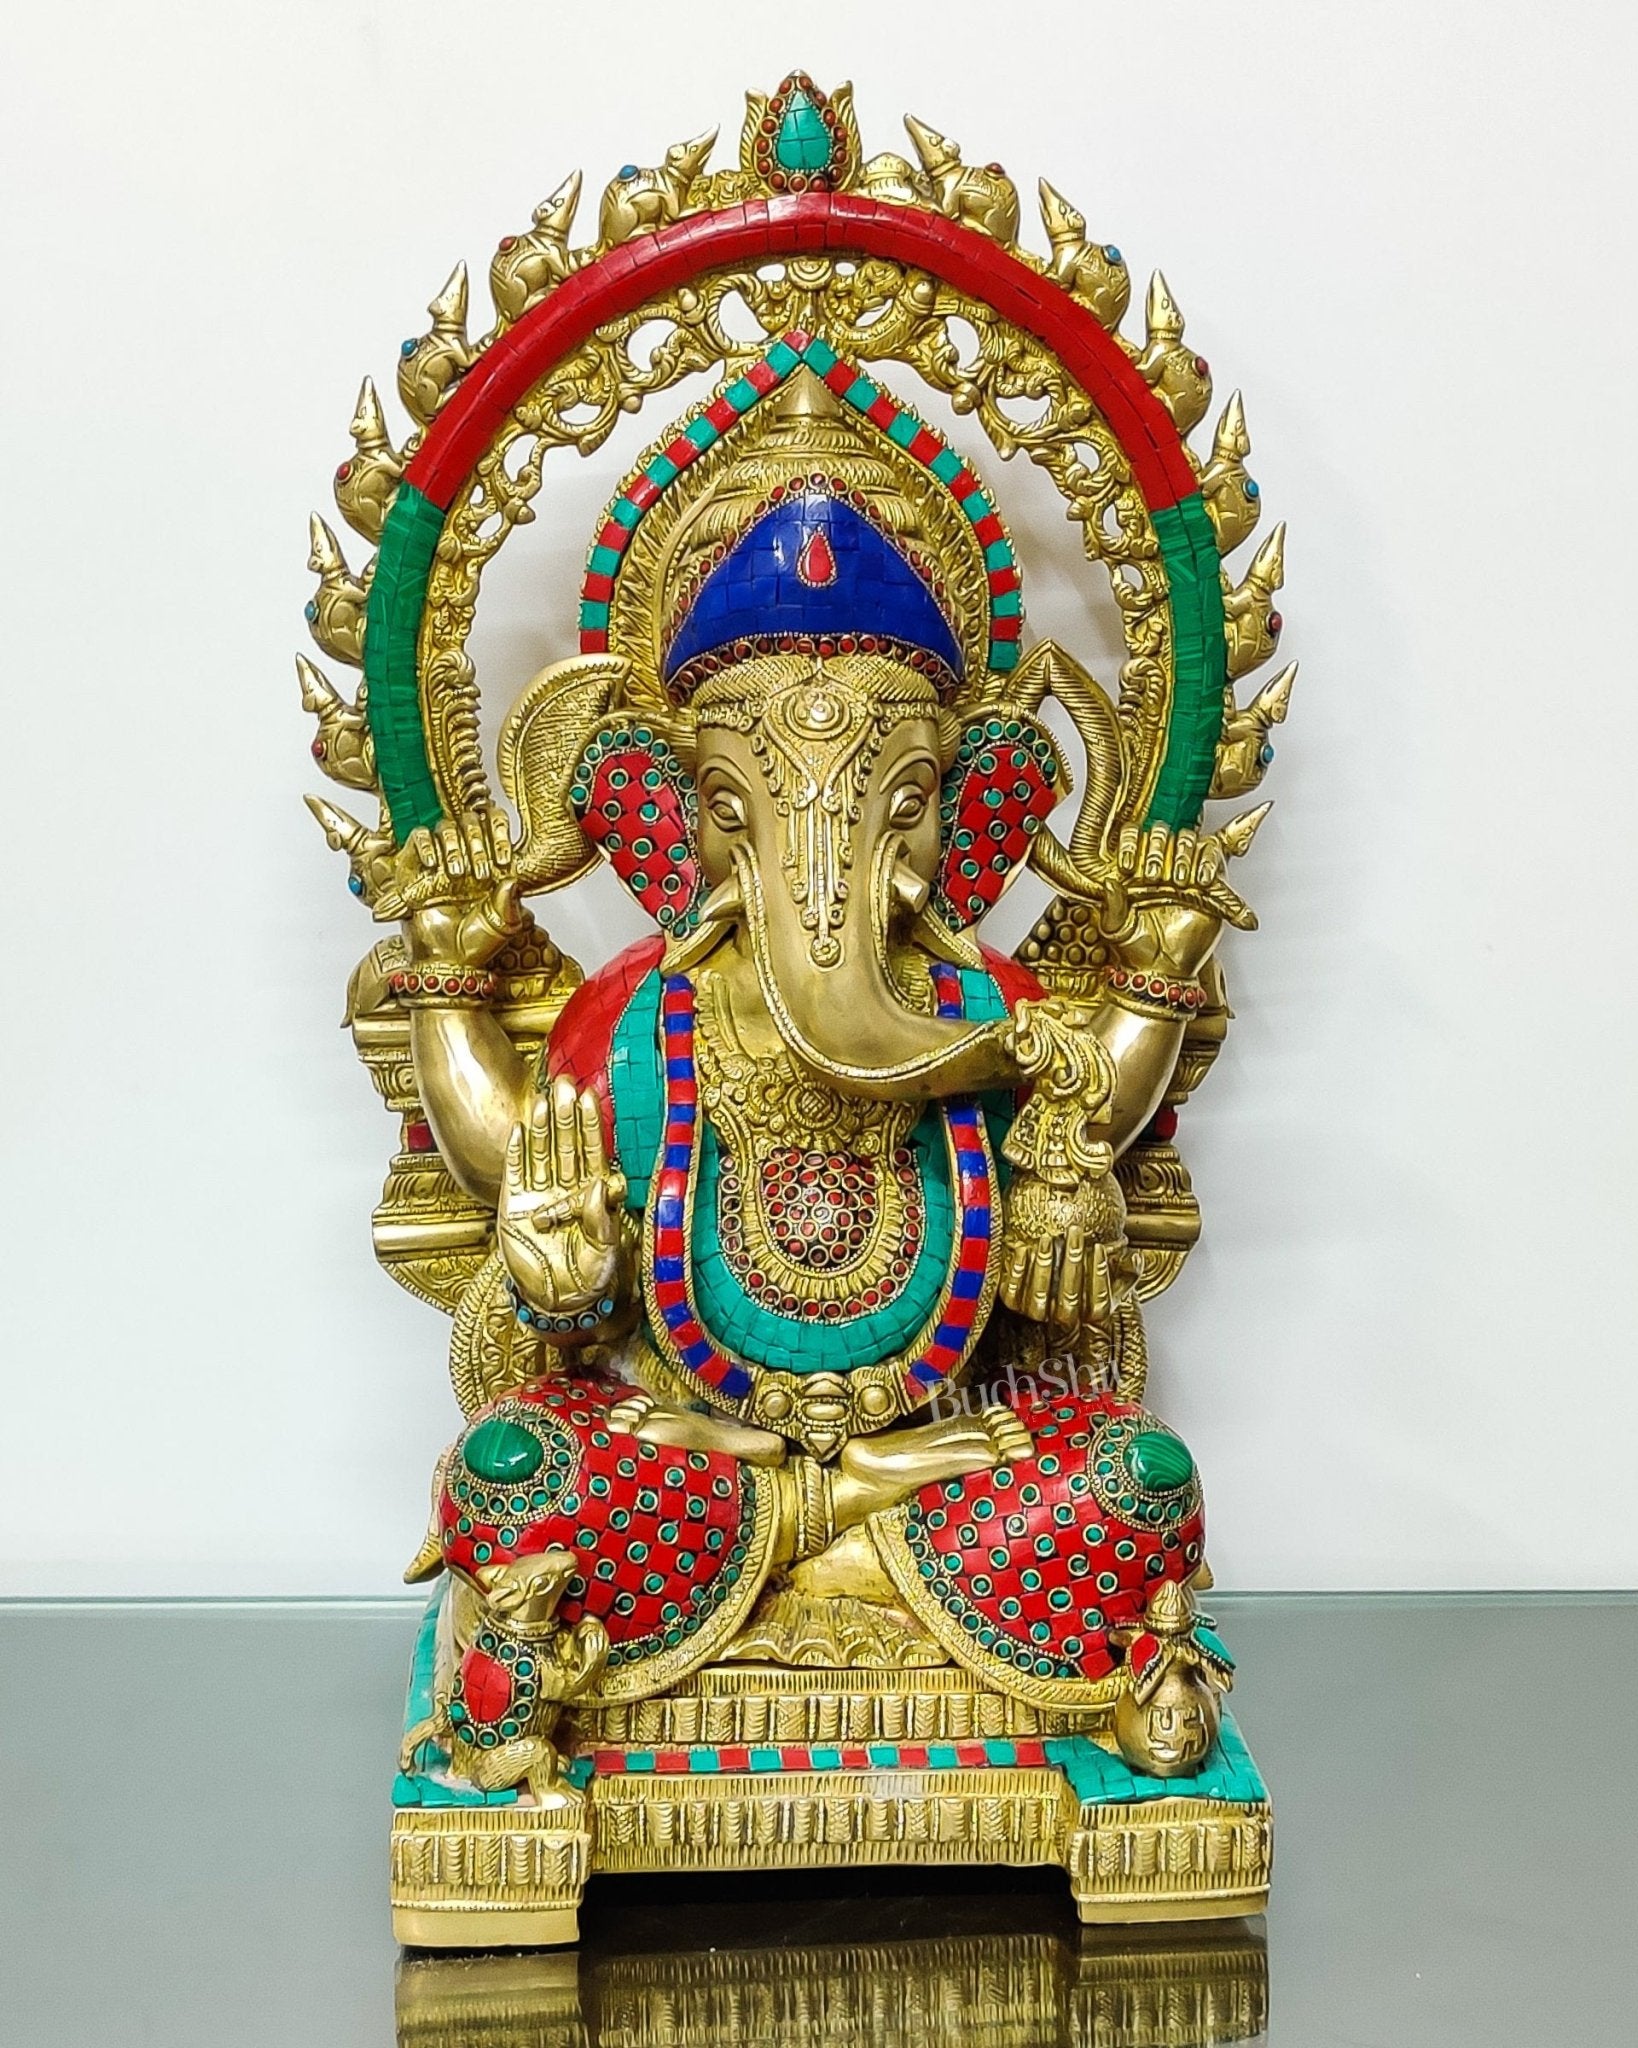 Ganesha Brass Idol 21 inches Ganapati brass statue with a Unique Prabhavali with Rats engraved - Budhshiv.com